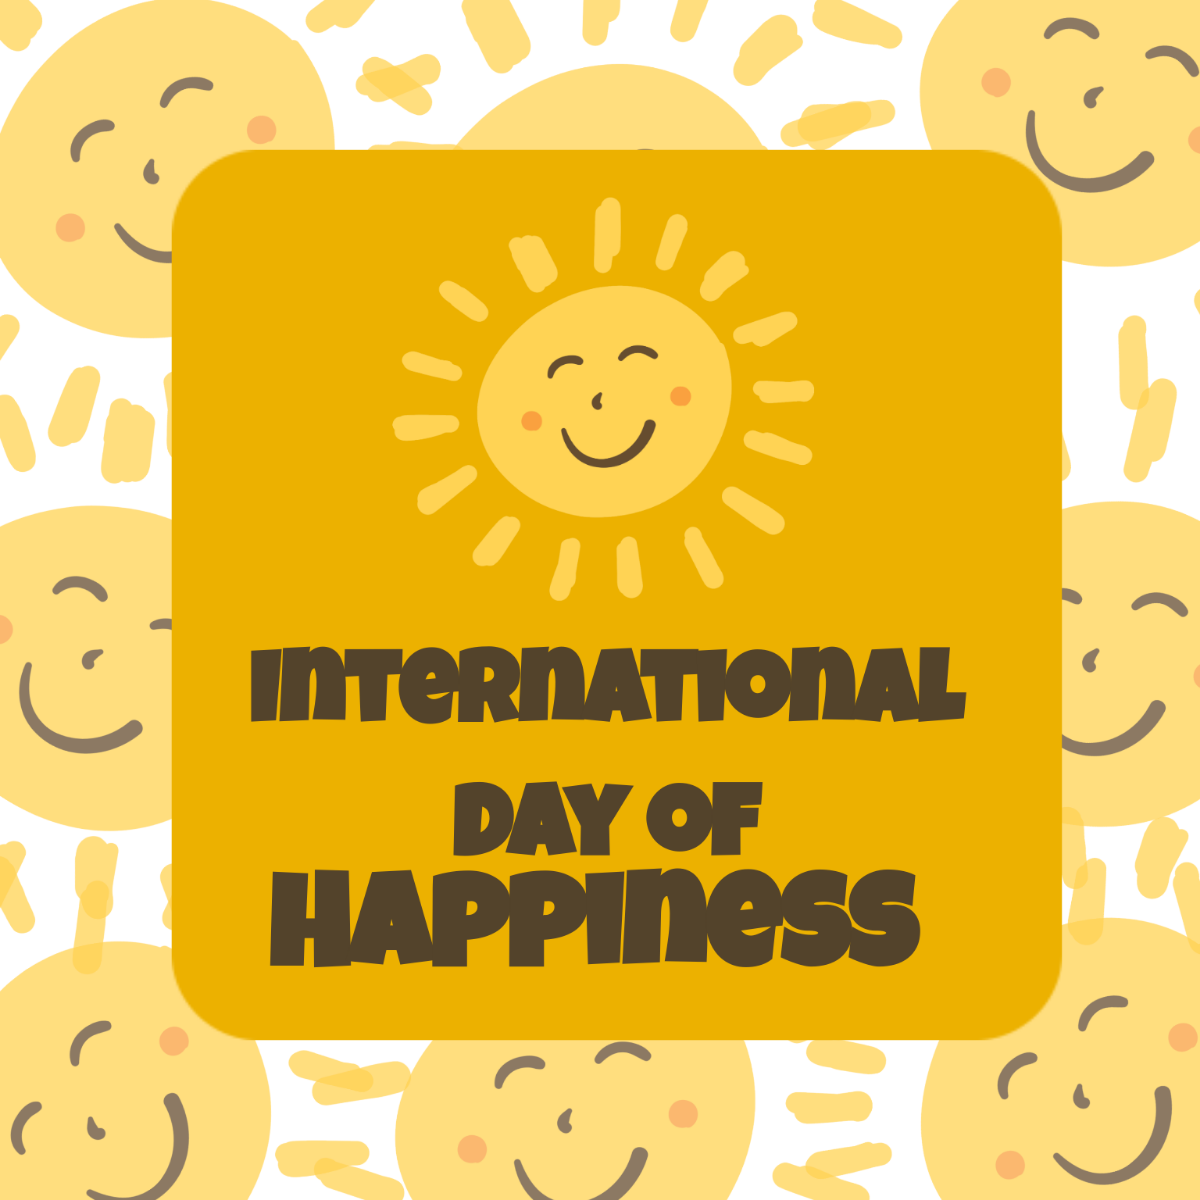 International Day of Happiness Poster Vector